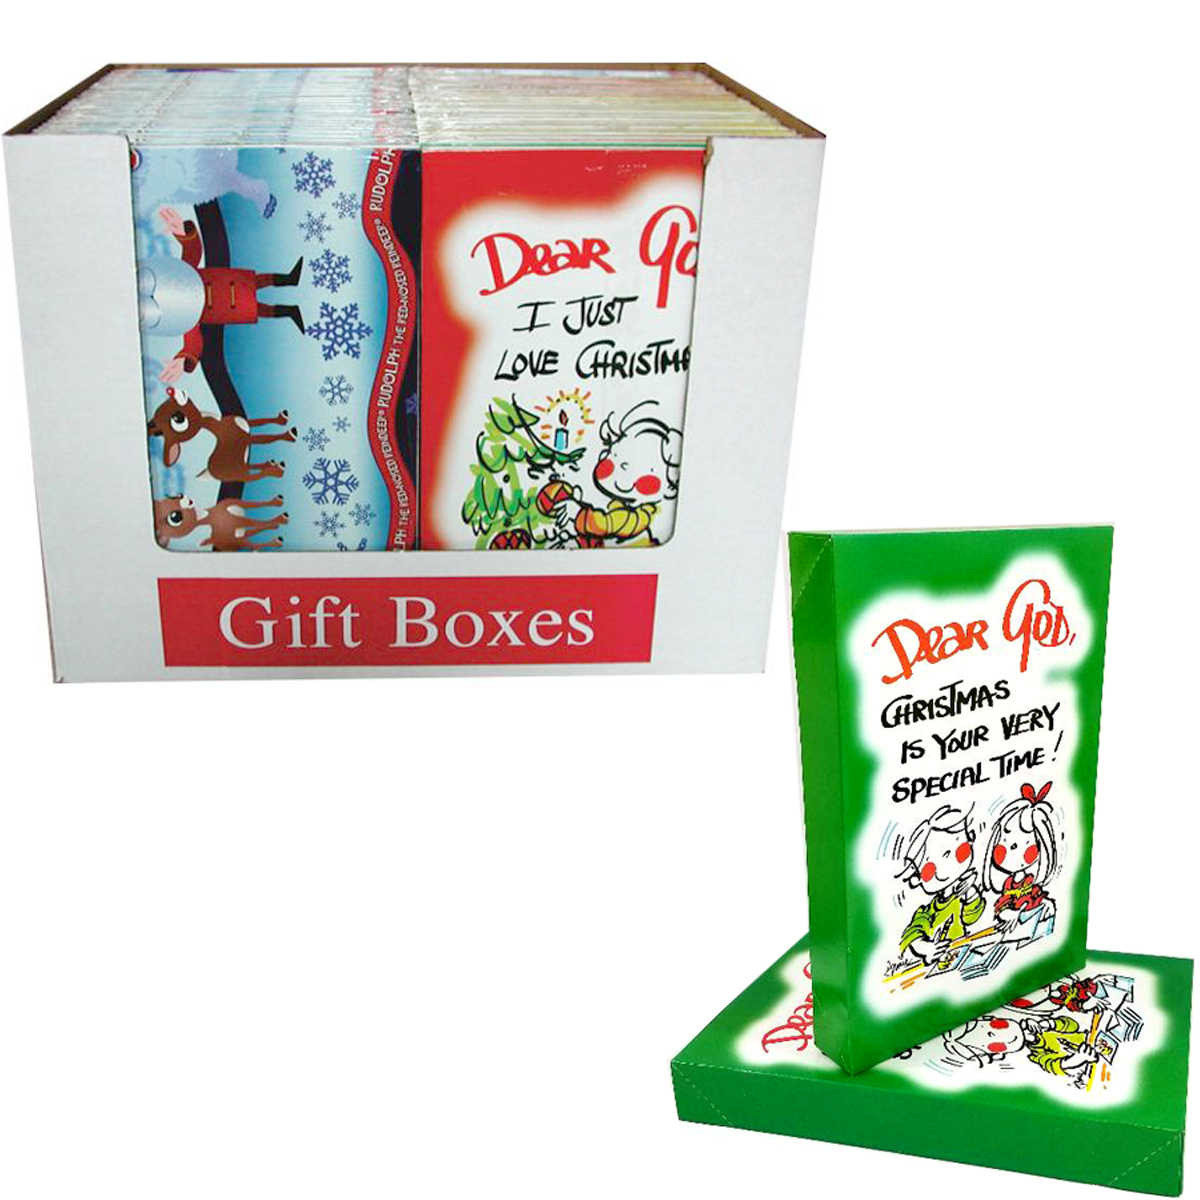 LICENSED Gift Boxes w/ Christmas Prints